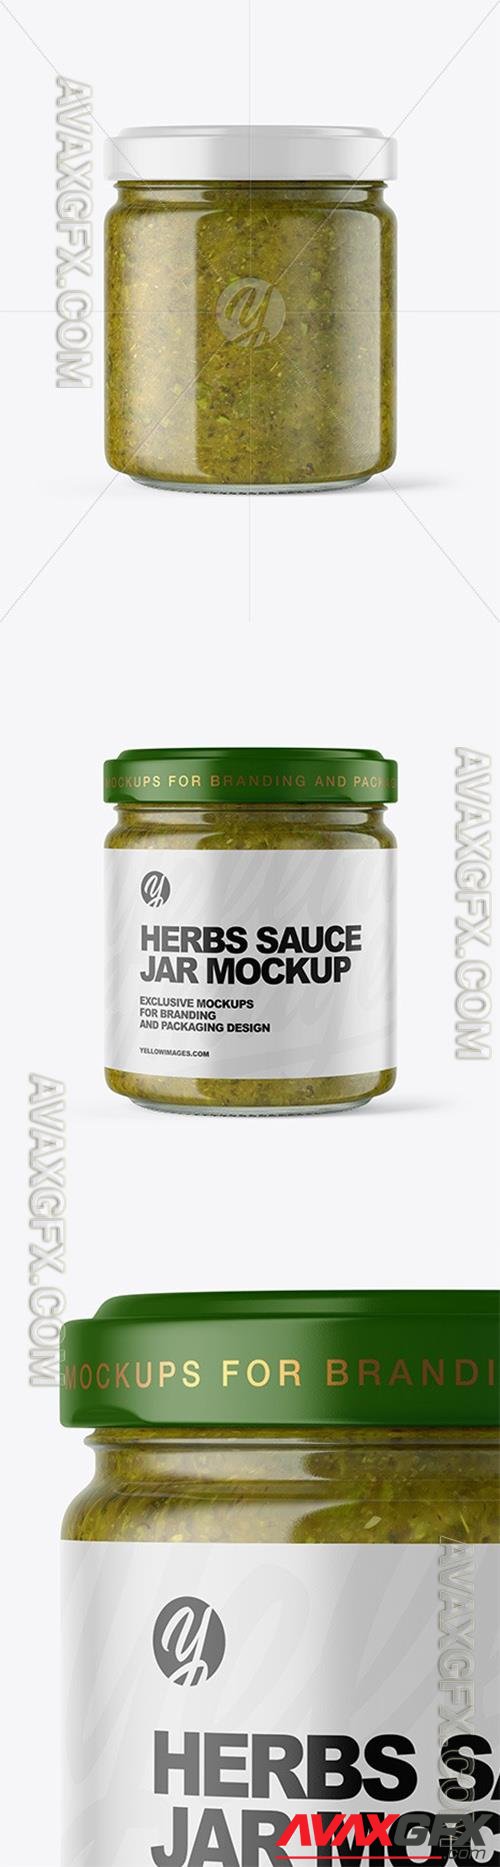 Clear Glass Jar with Spicy Herbs Sauce Mockup 78154 TIF